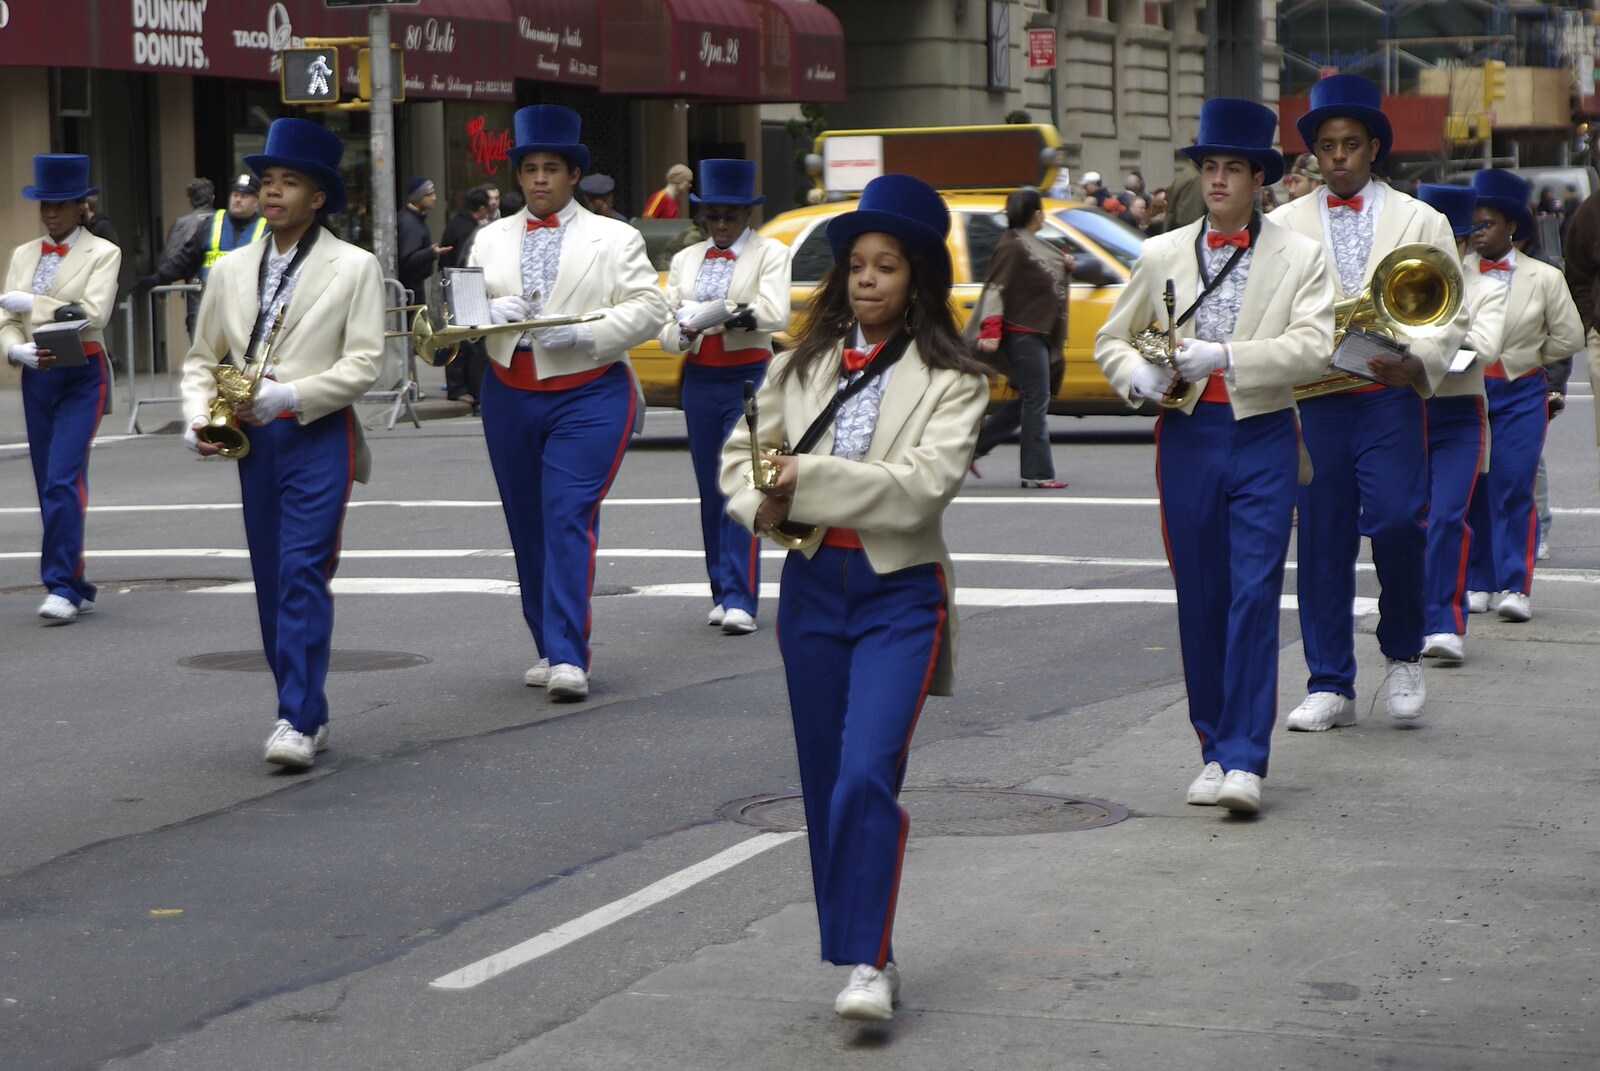 Persian Day Parade, Upper East Side and Midtown, New York, US - 25th March 2007: A marching band